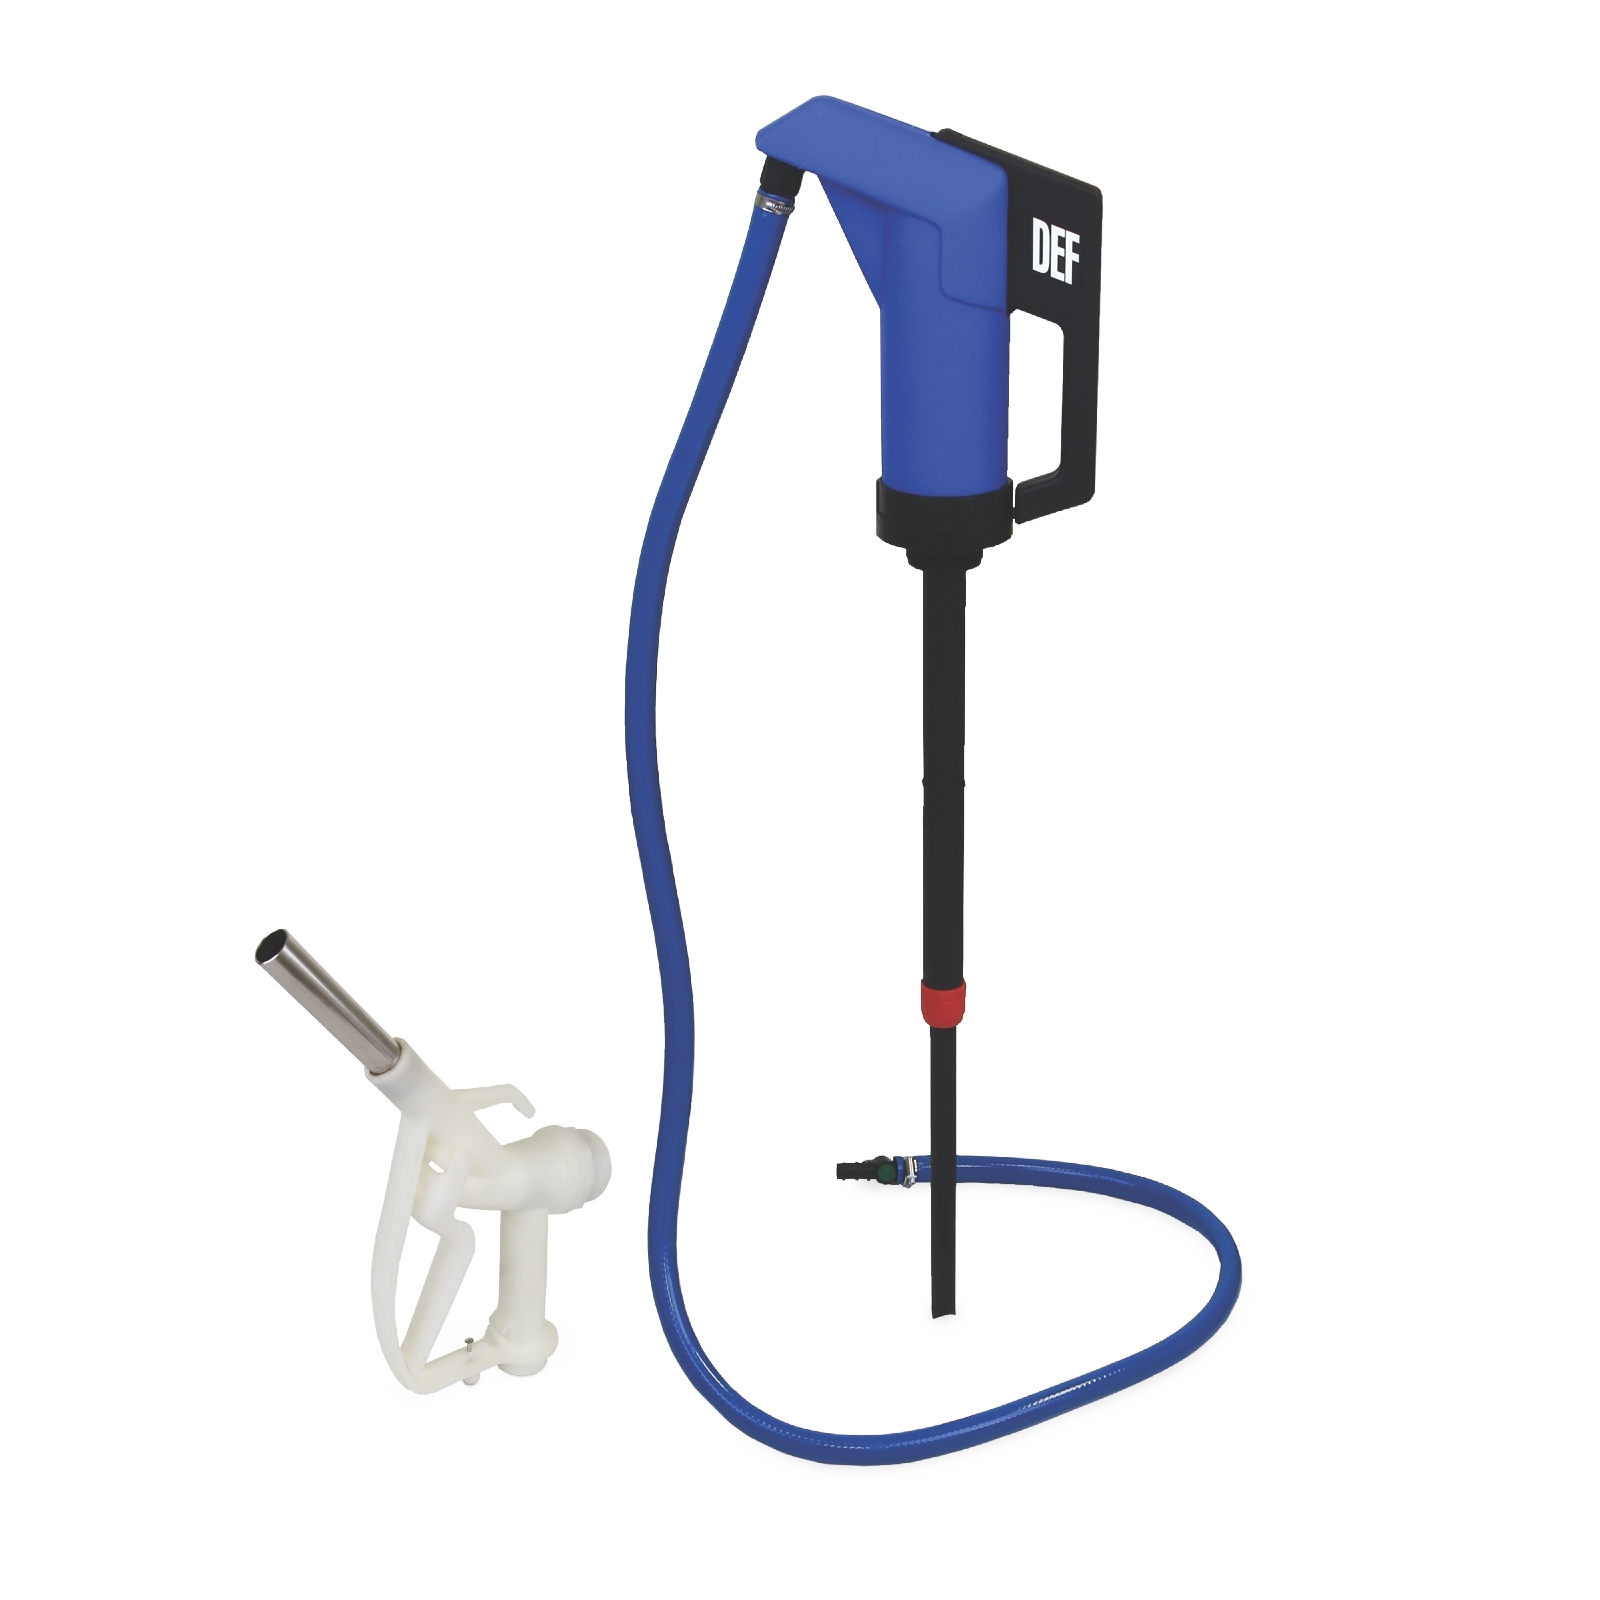 Drum Pump Package with Auto Nozzle 9 gpm Max Flow Rate Graco 24V656 LD Blue Electric Diesel Exhaust Fluid 120V DEF